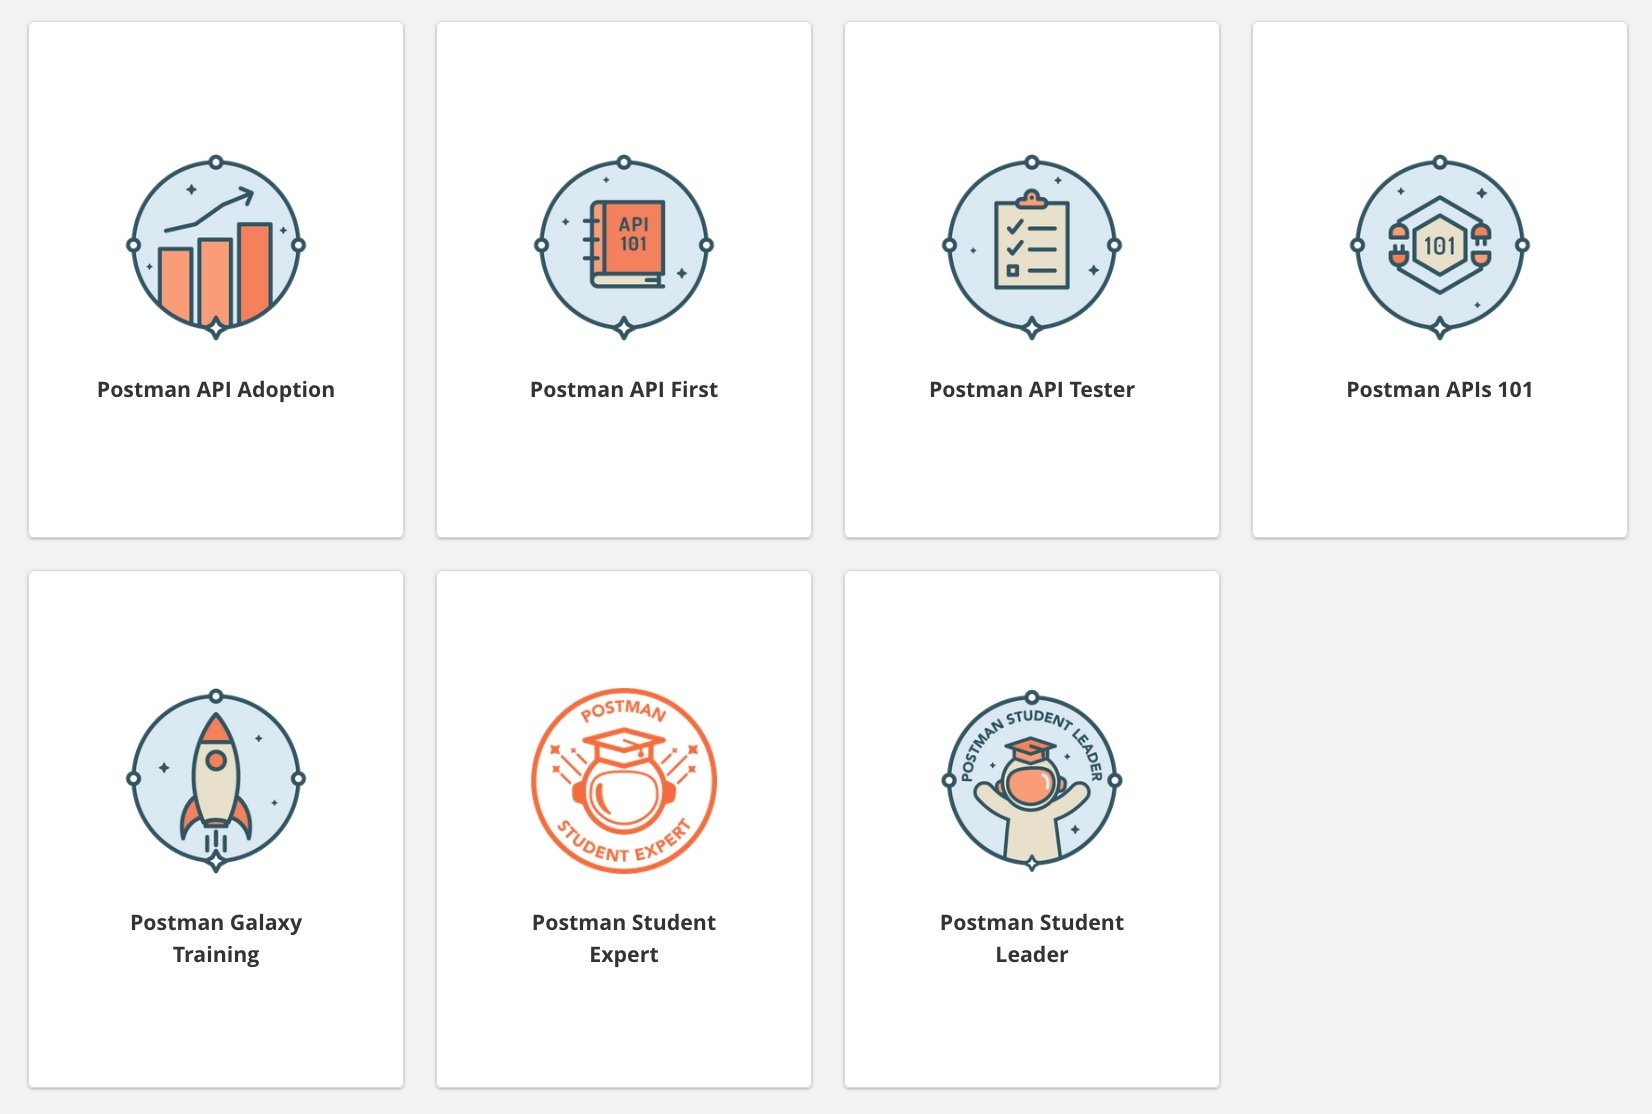 Postman badges recognizing completed trainings